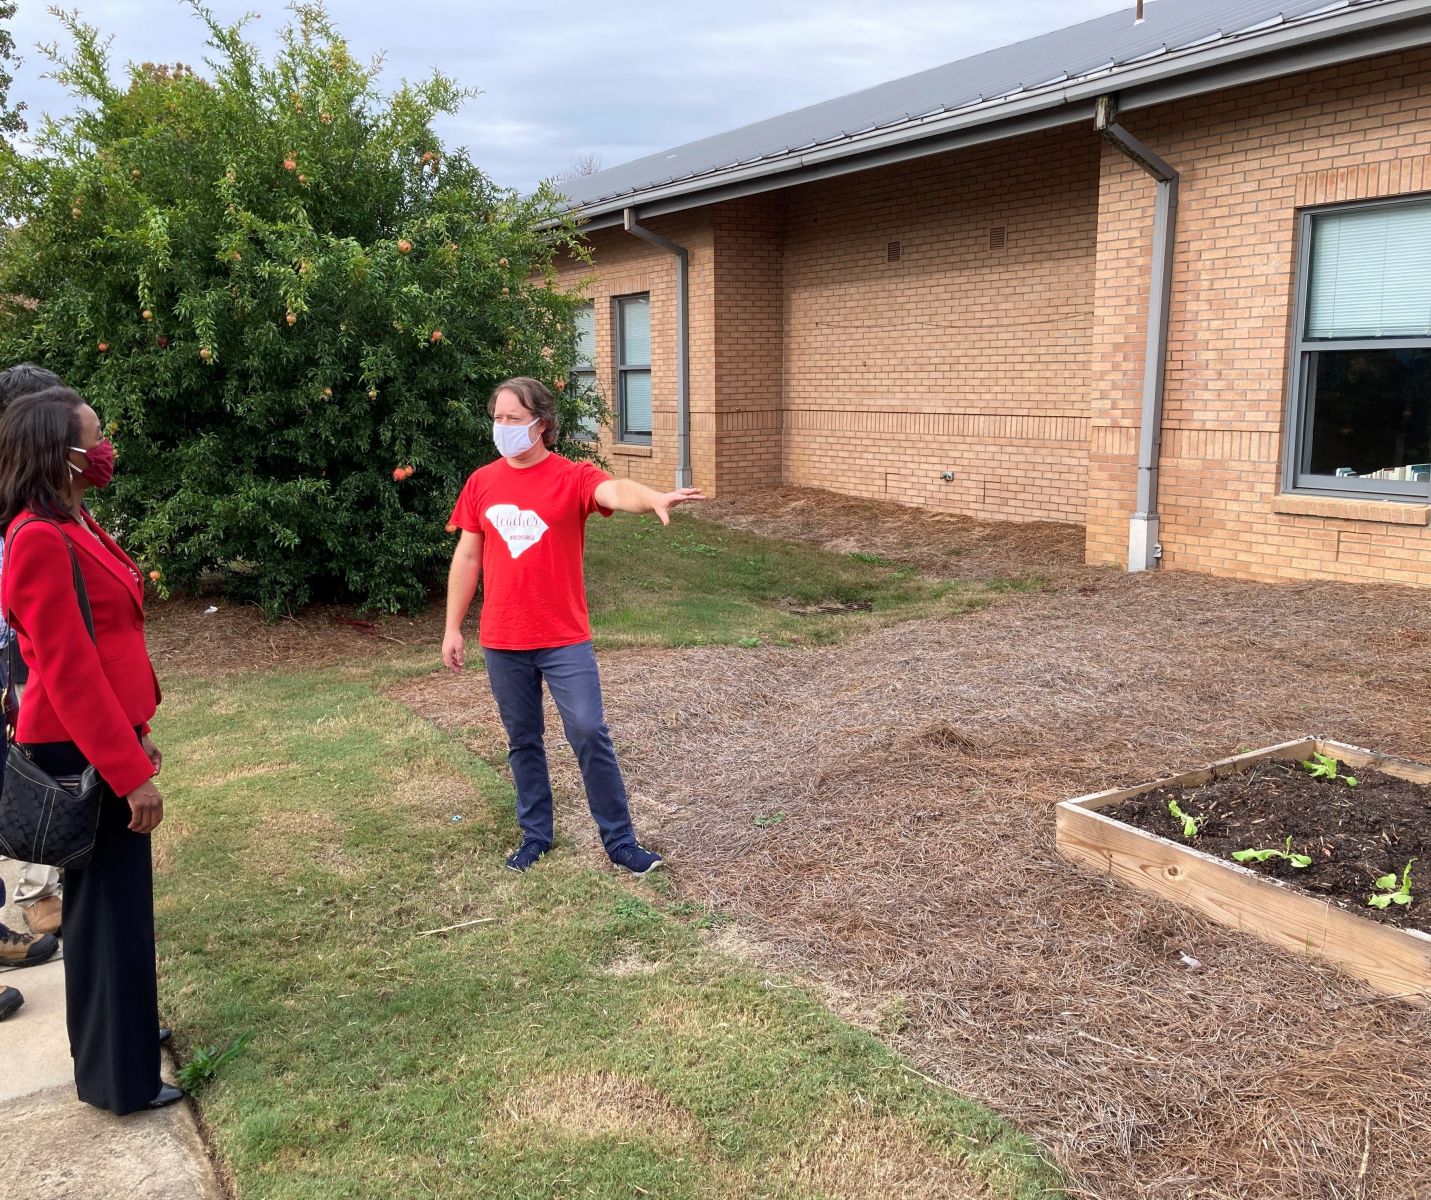 Jamison Browder shows off garden beds used to teach students about gardening and conservation at Meadowfield Elementary School as Richland County Councilwoman Chakisse Newton looks on. (Photo/Provided)